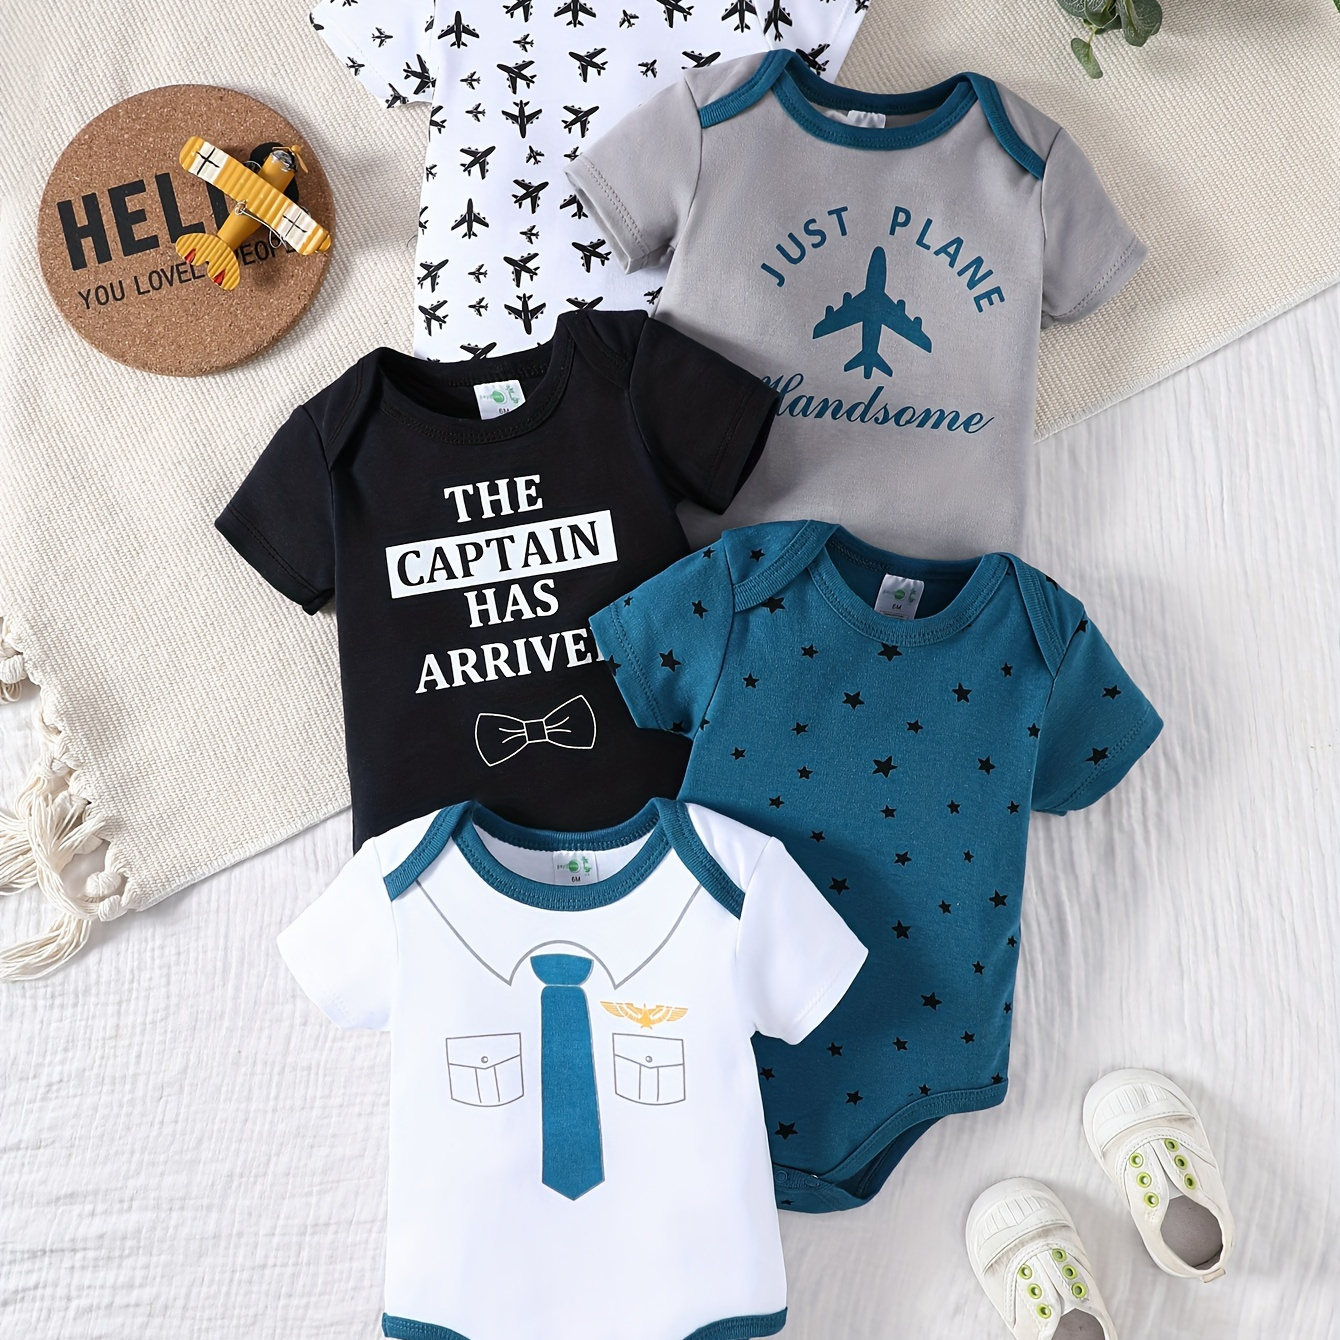 

5pcs Baby's Cartoon Airplane Pattern Cotton Triangle Bodysuit, Casual Short Sleeve Romper, Toddler & Infant Boy's Clothing